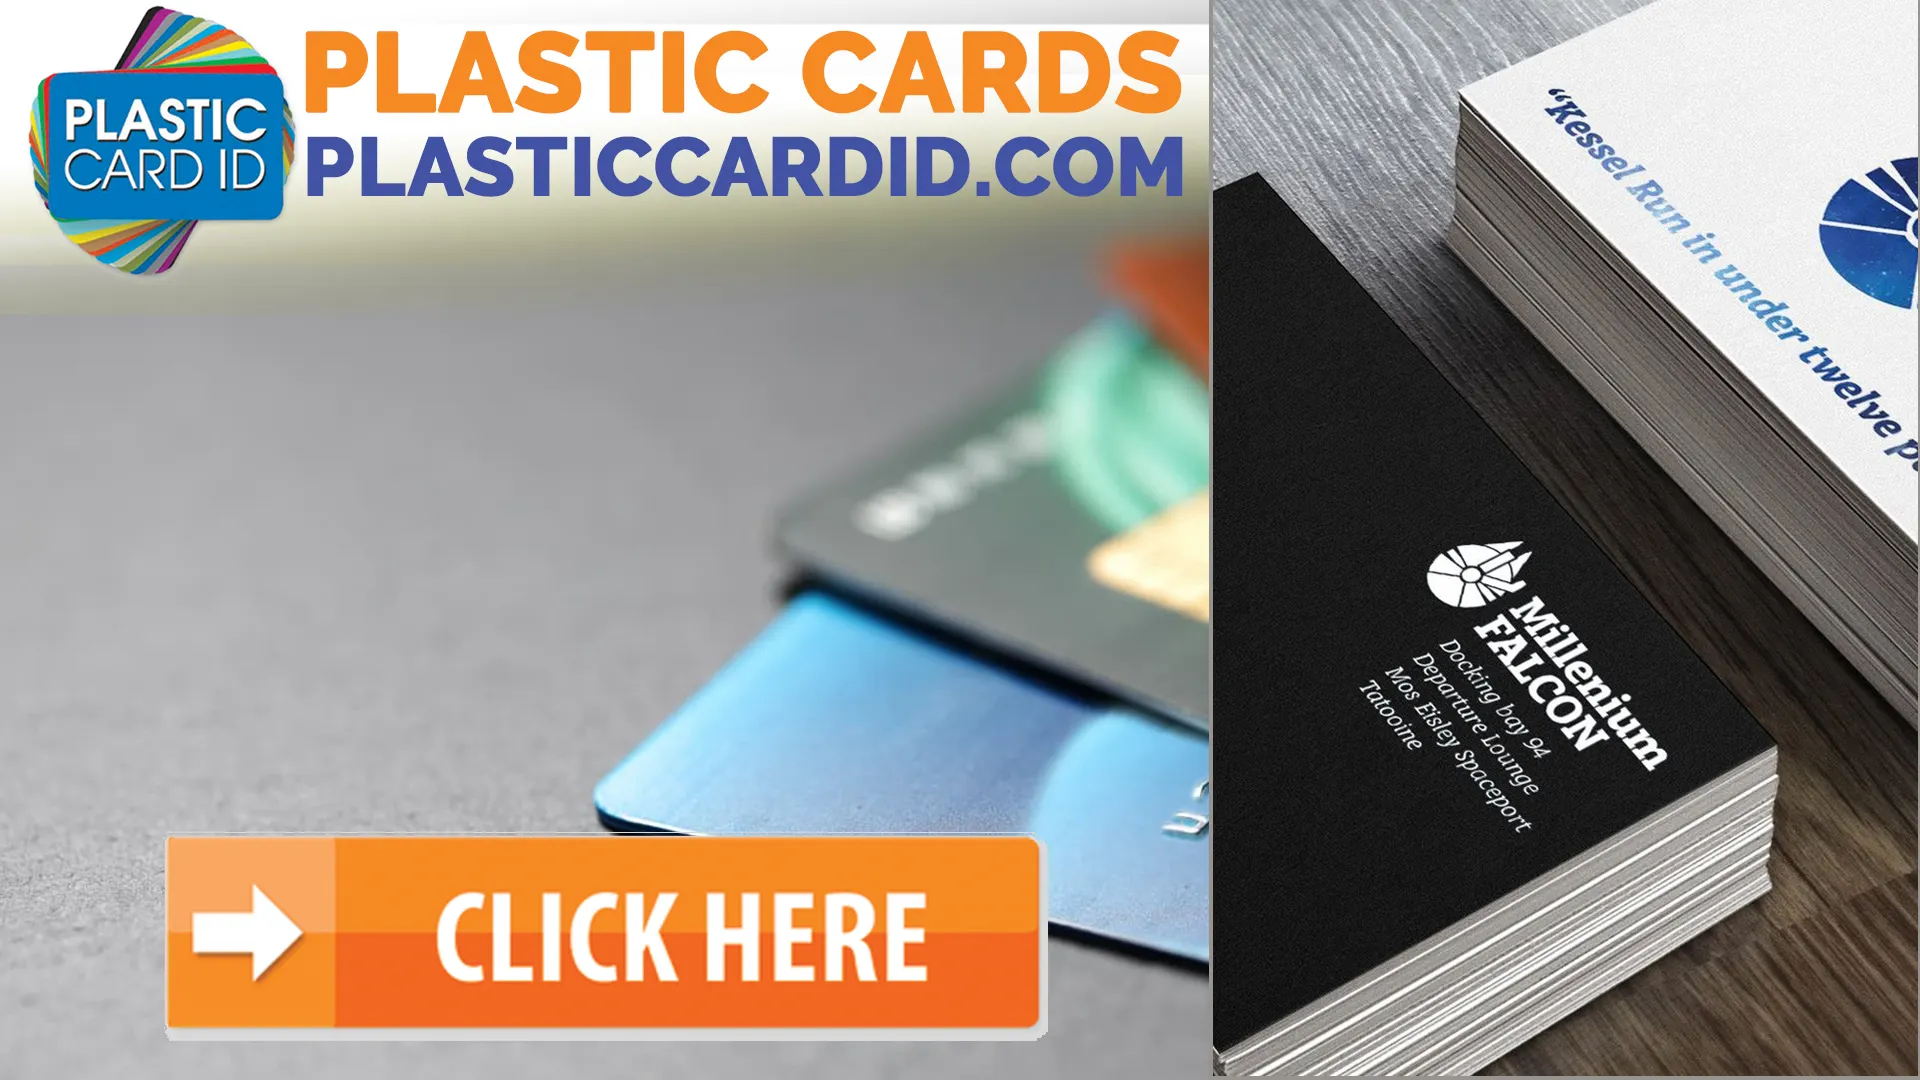 Flexibility in Function: Our Versatile Card Offerings